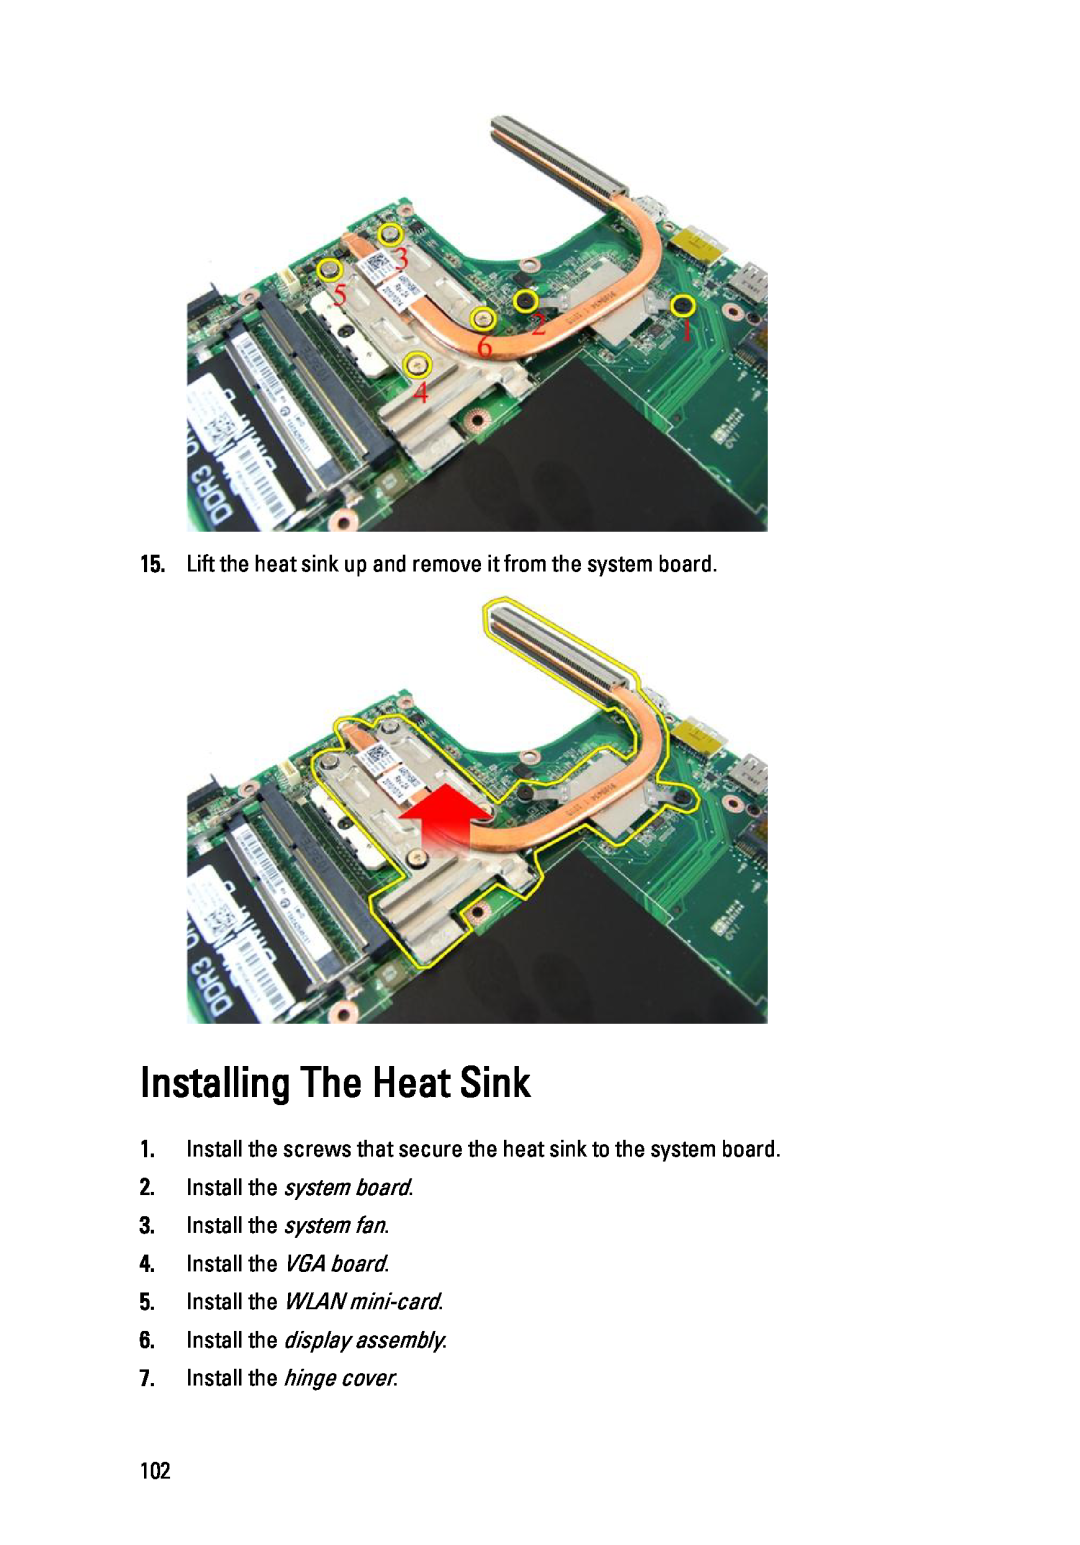 Dell 3450 Installing The Heat Sink, Lift the heat sink up and remove it from the system board, Install the VGA board 